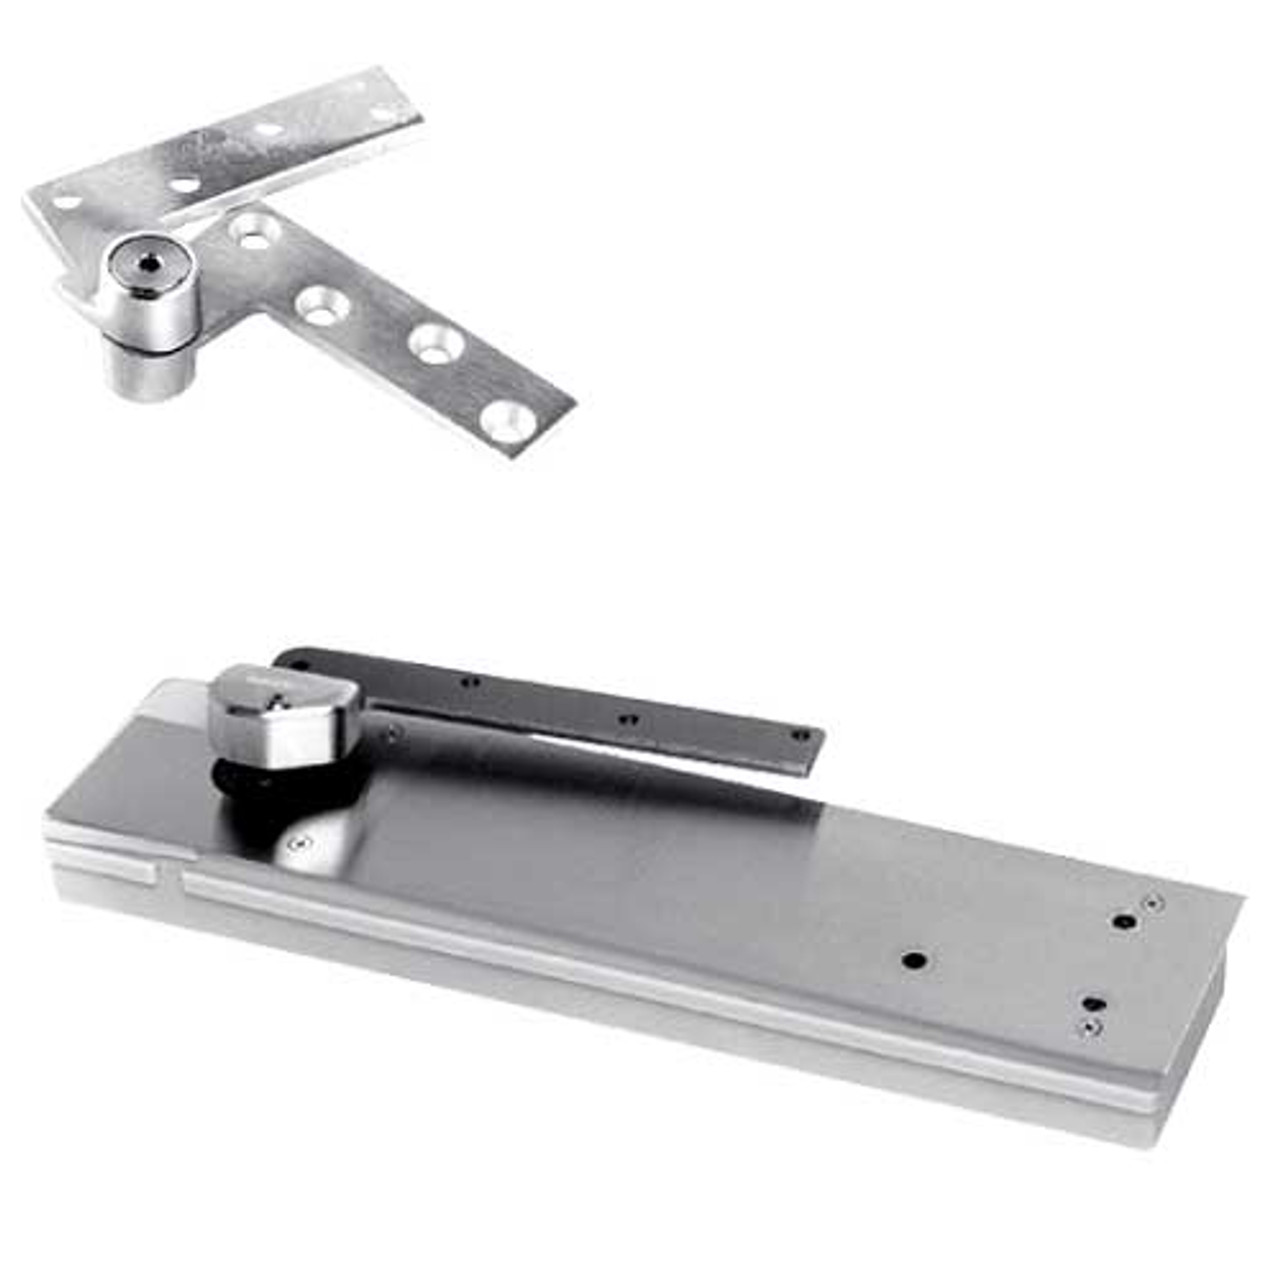 5104ABC180-1-1/2OS-LFP-LTP-LH-625 Rixson 51 Series 1-1/2" Offset Hung Shallow Depth Floor Closers in Bright Chrome Finish